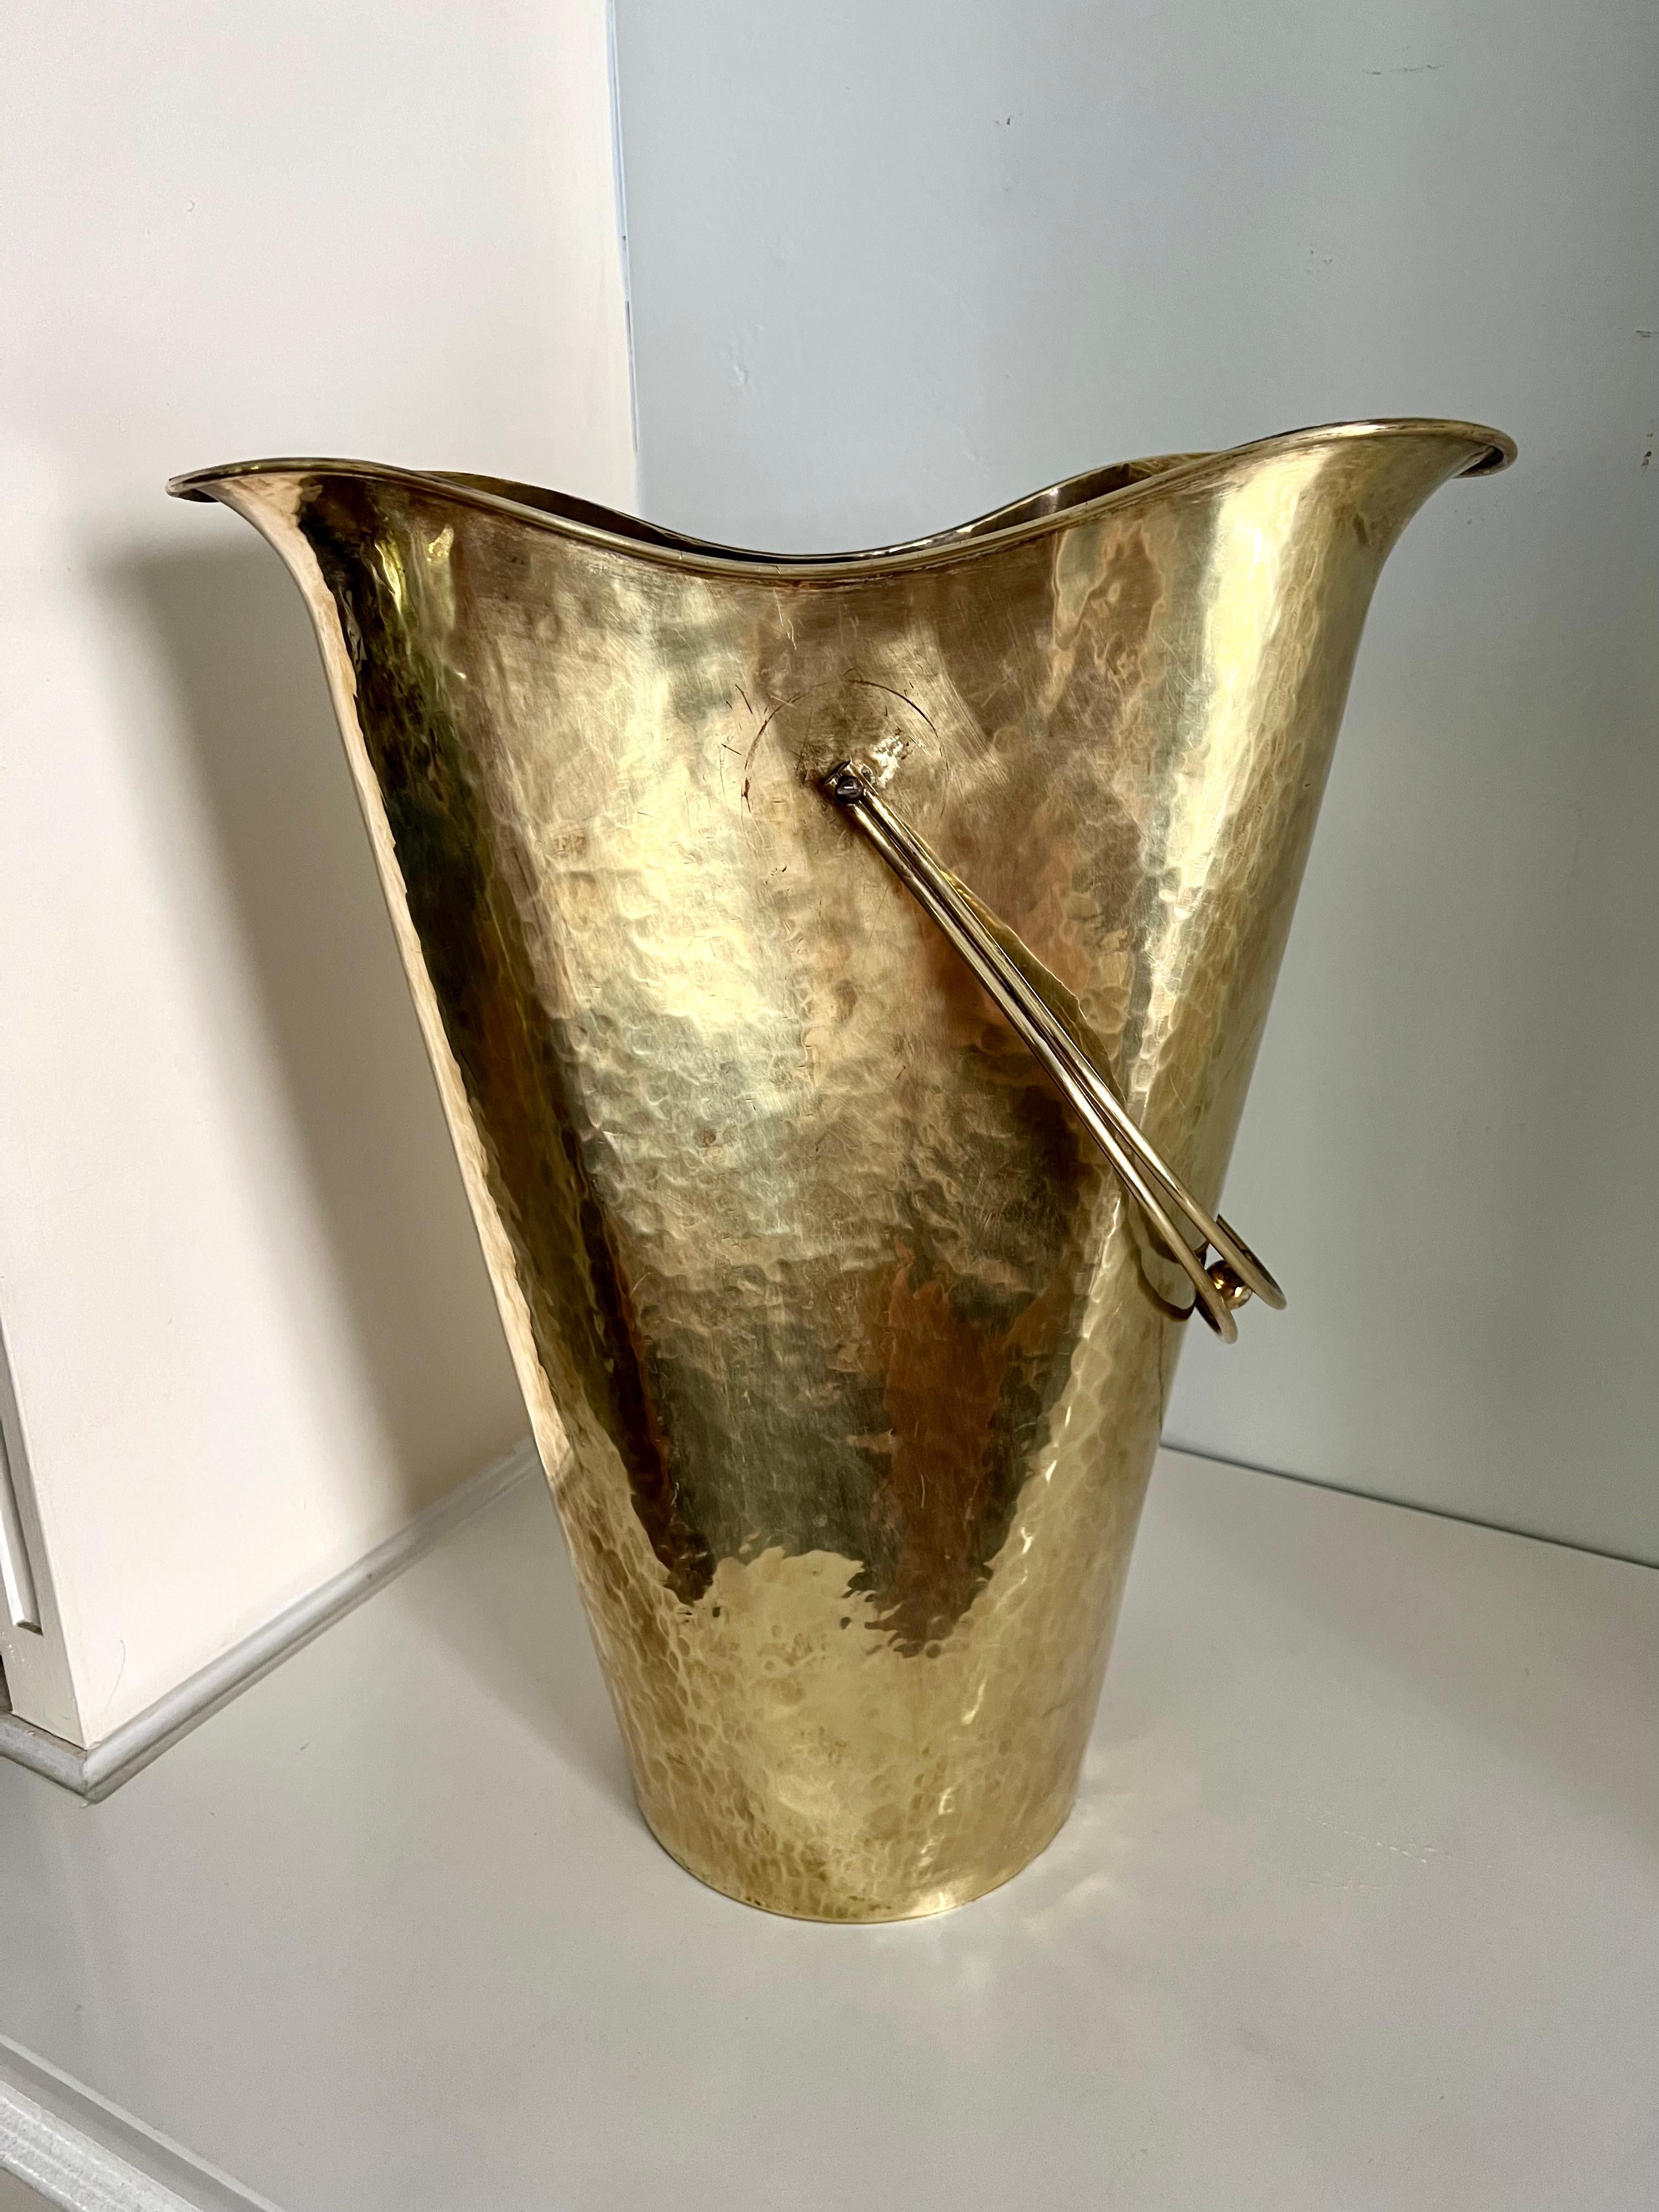 A unique brass container, could be used as an umbrella stand or as another option, as a kindling or wood container next to the fireplace. The size is large and will hold a lot of either umbrella's or kindling. ... Or be creative and use the